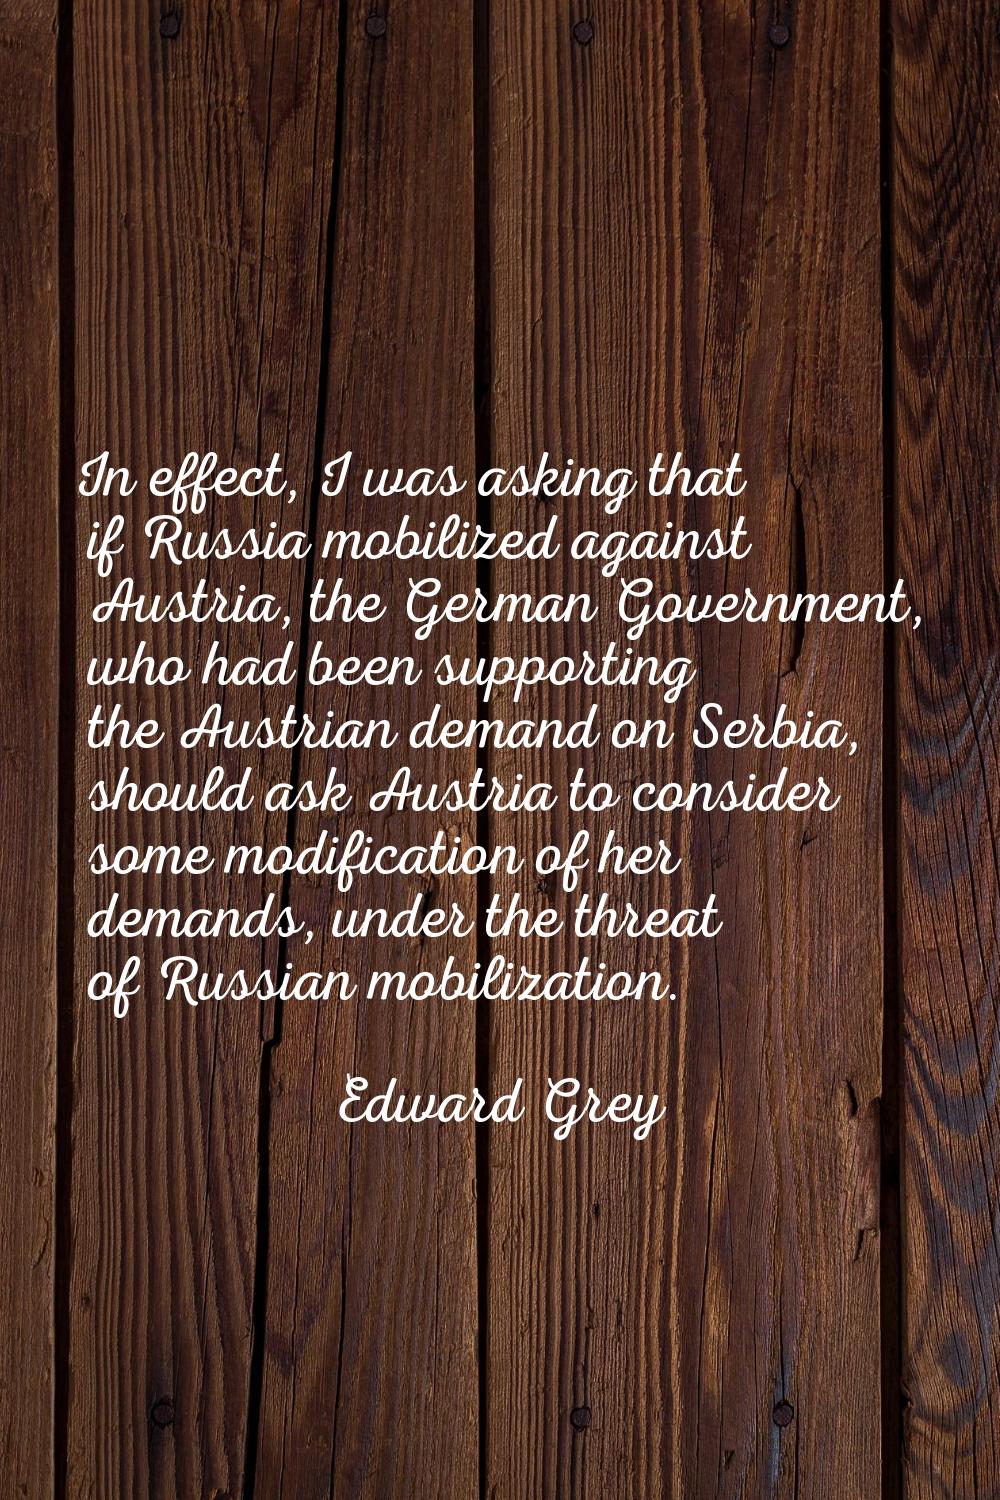 In effect, I was asking that if Russia mobilized against Austria, the German Government, who had be